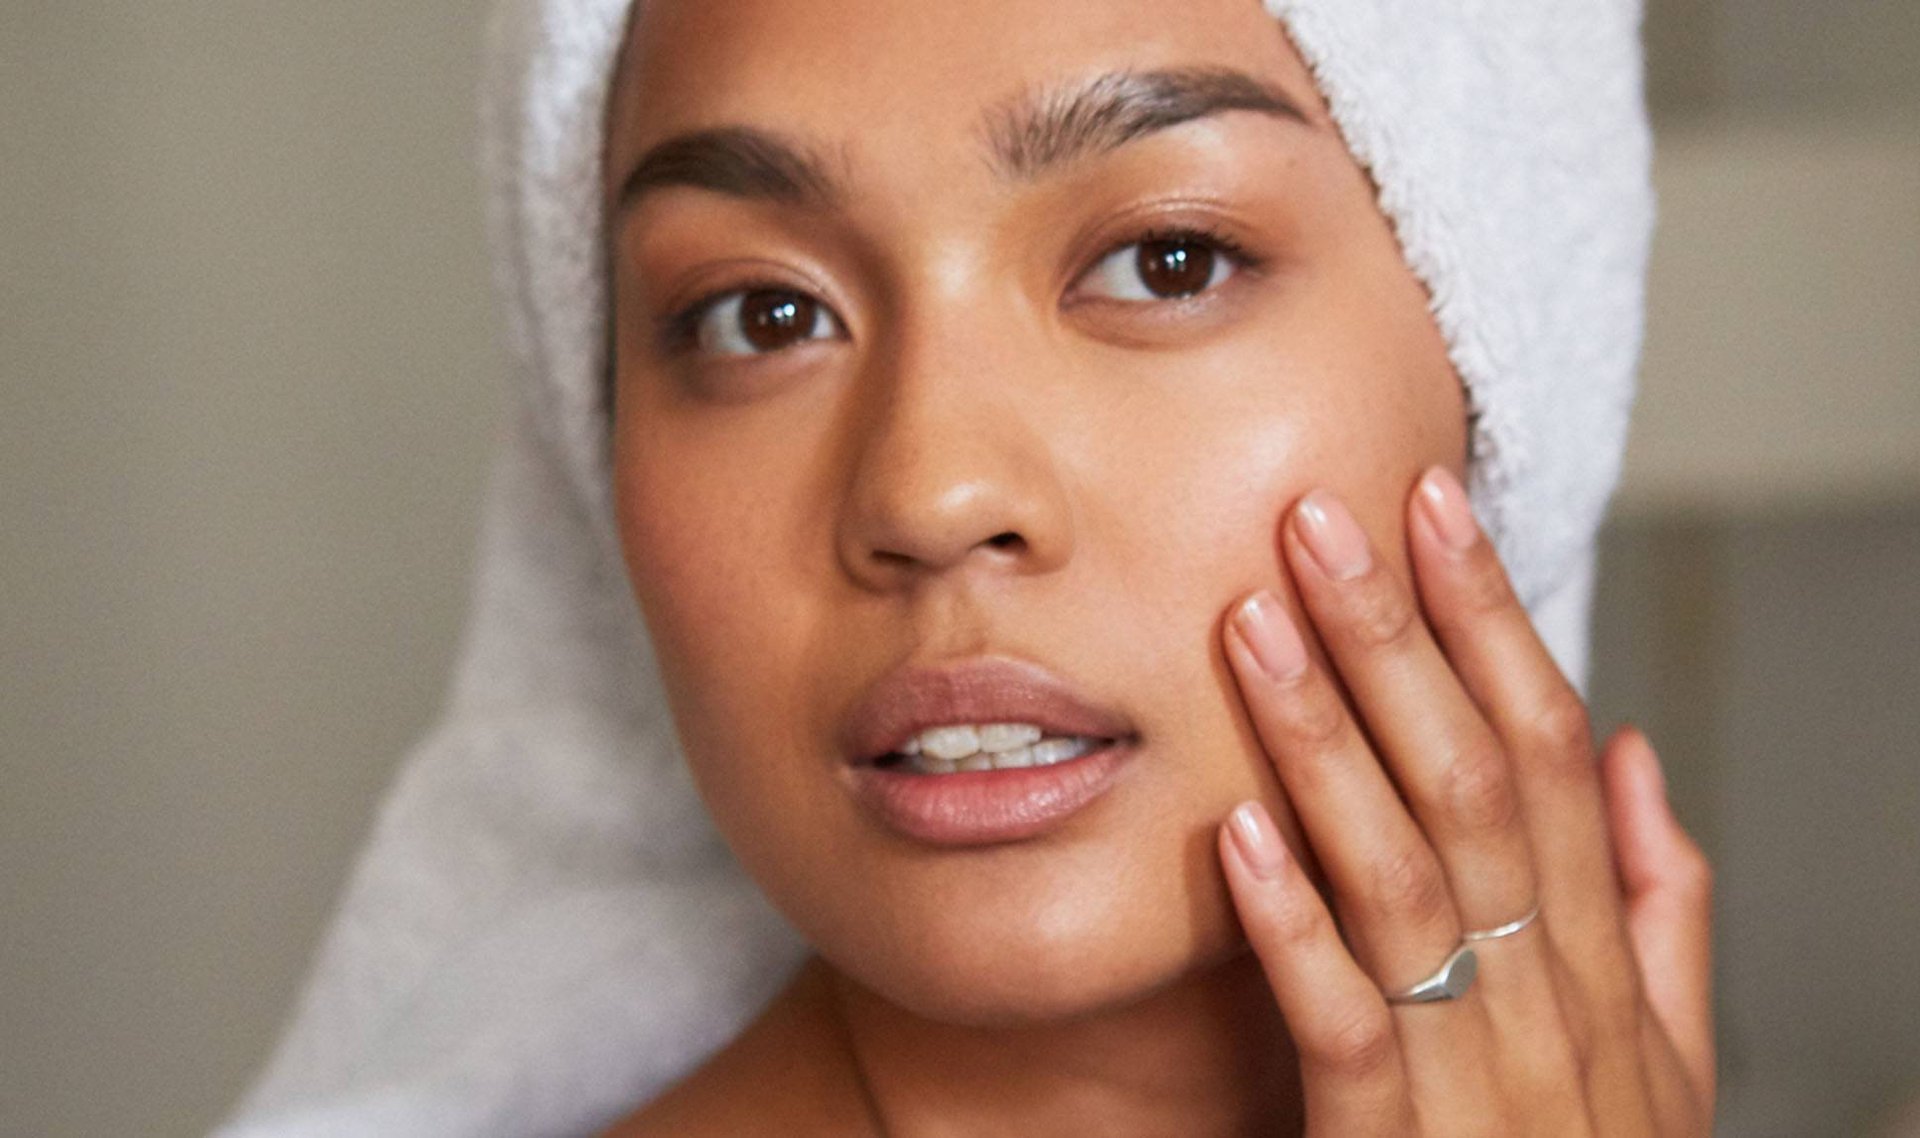 Face Shaving vs. Dermaplaning: What’s the Difference?